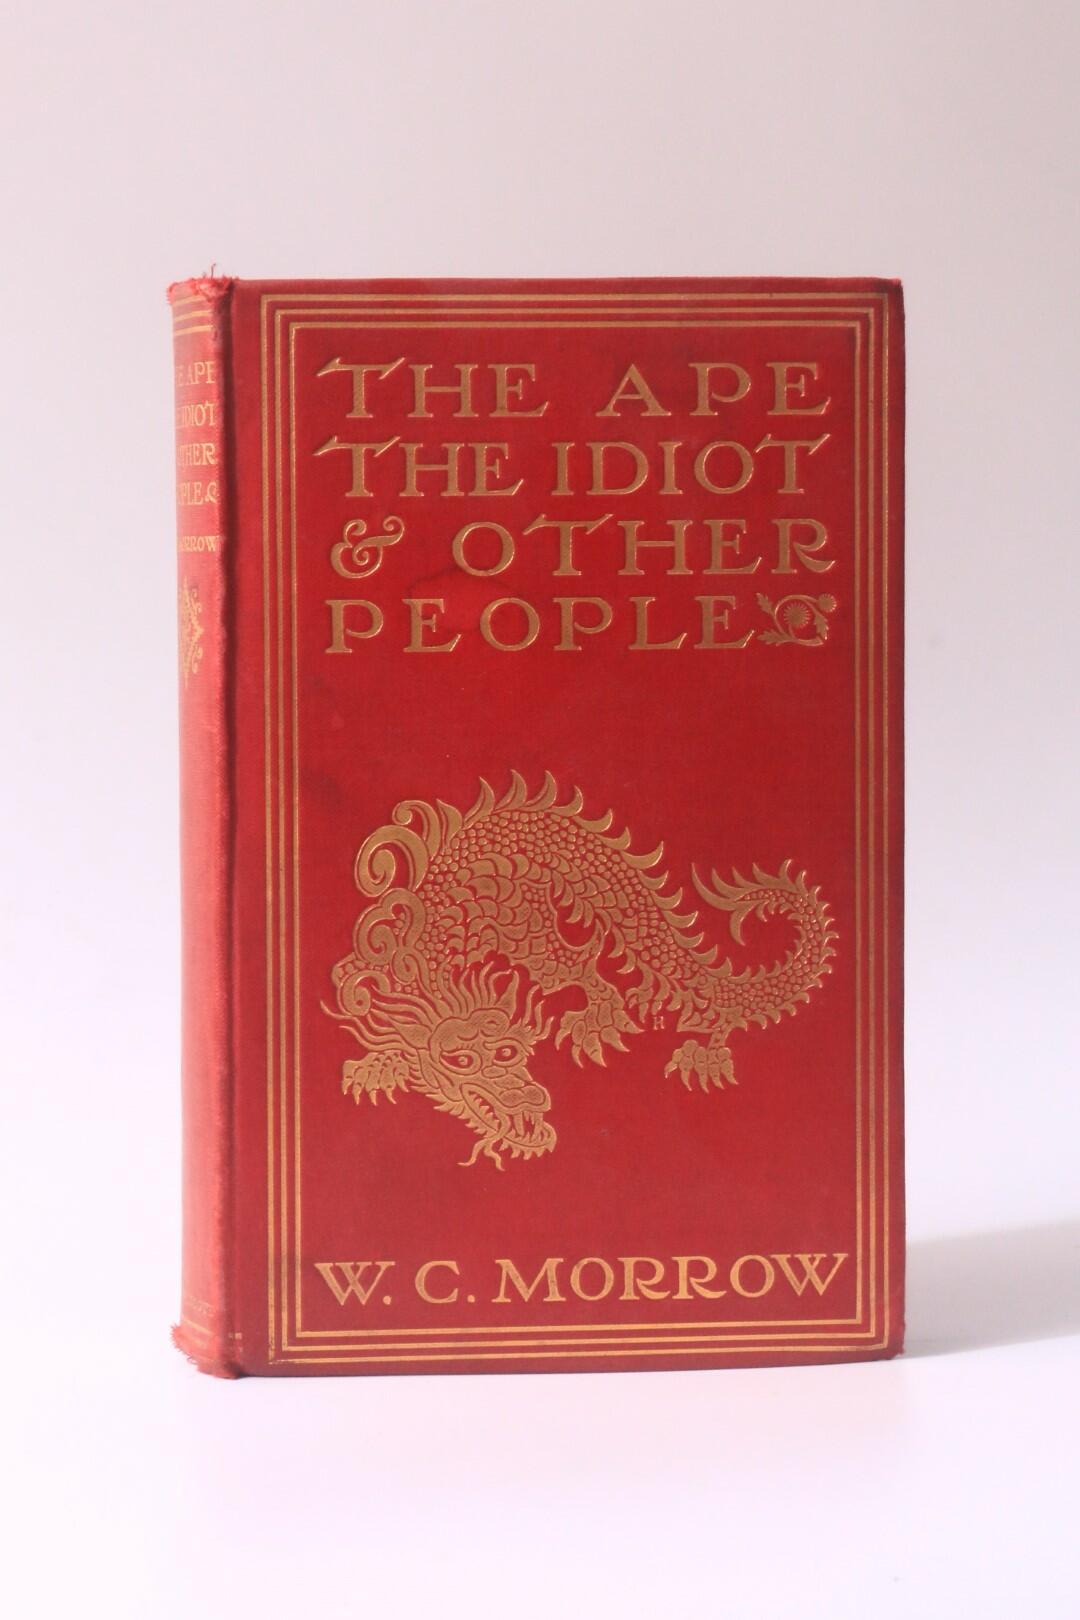 W.C. Morrow - The Ape, The Idiot & Other People - Lippincott, 1897, First Edition.